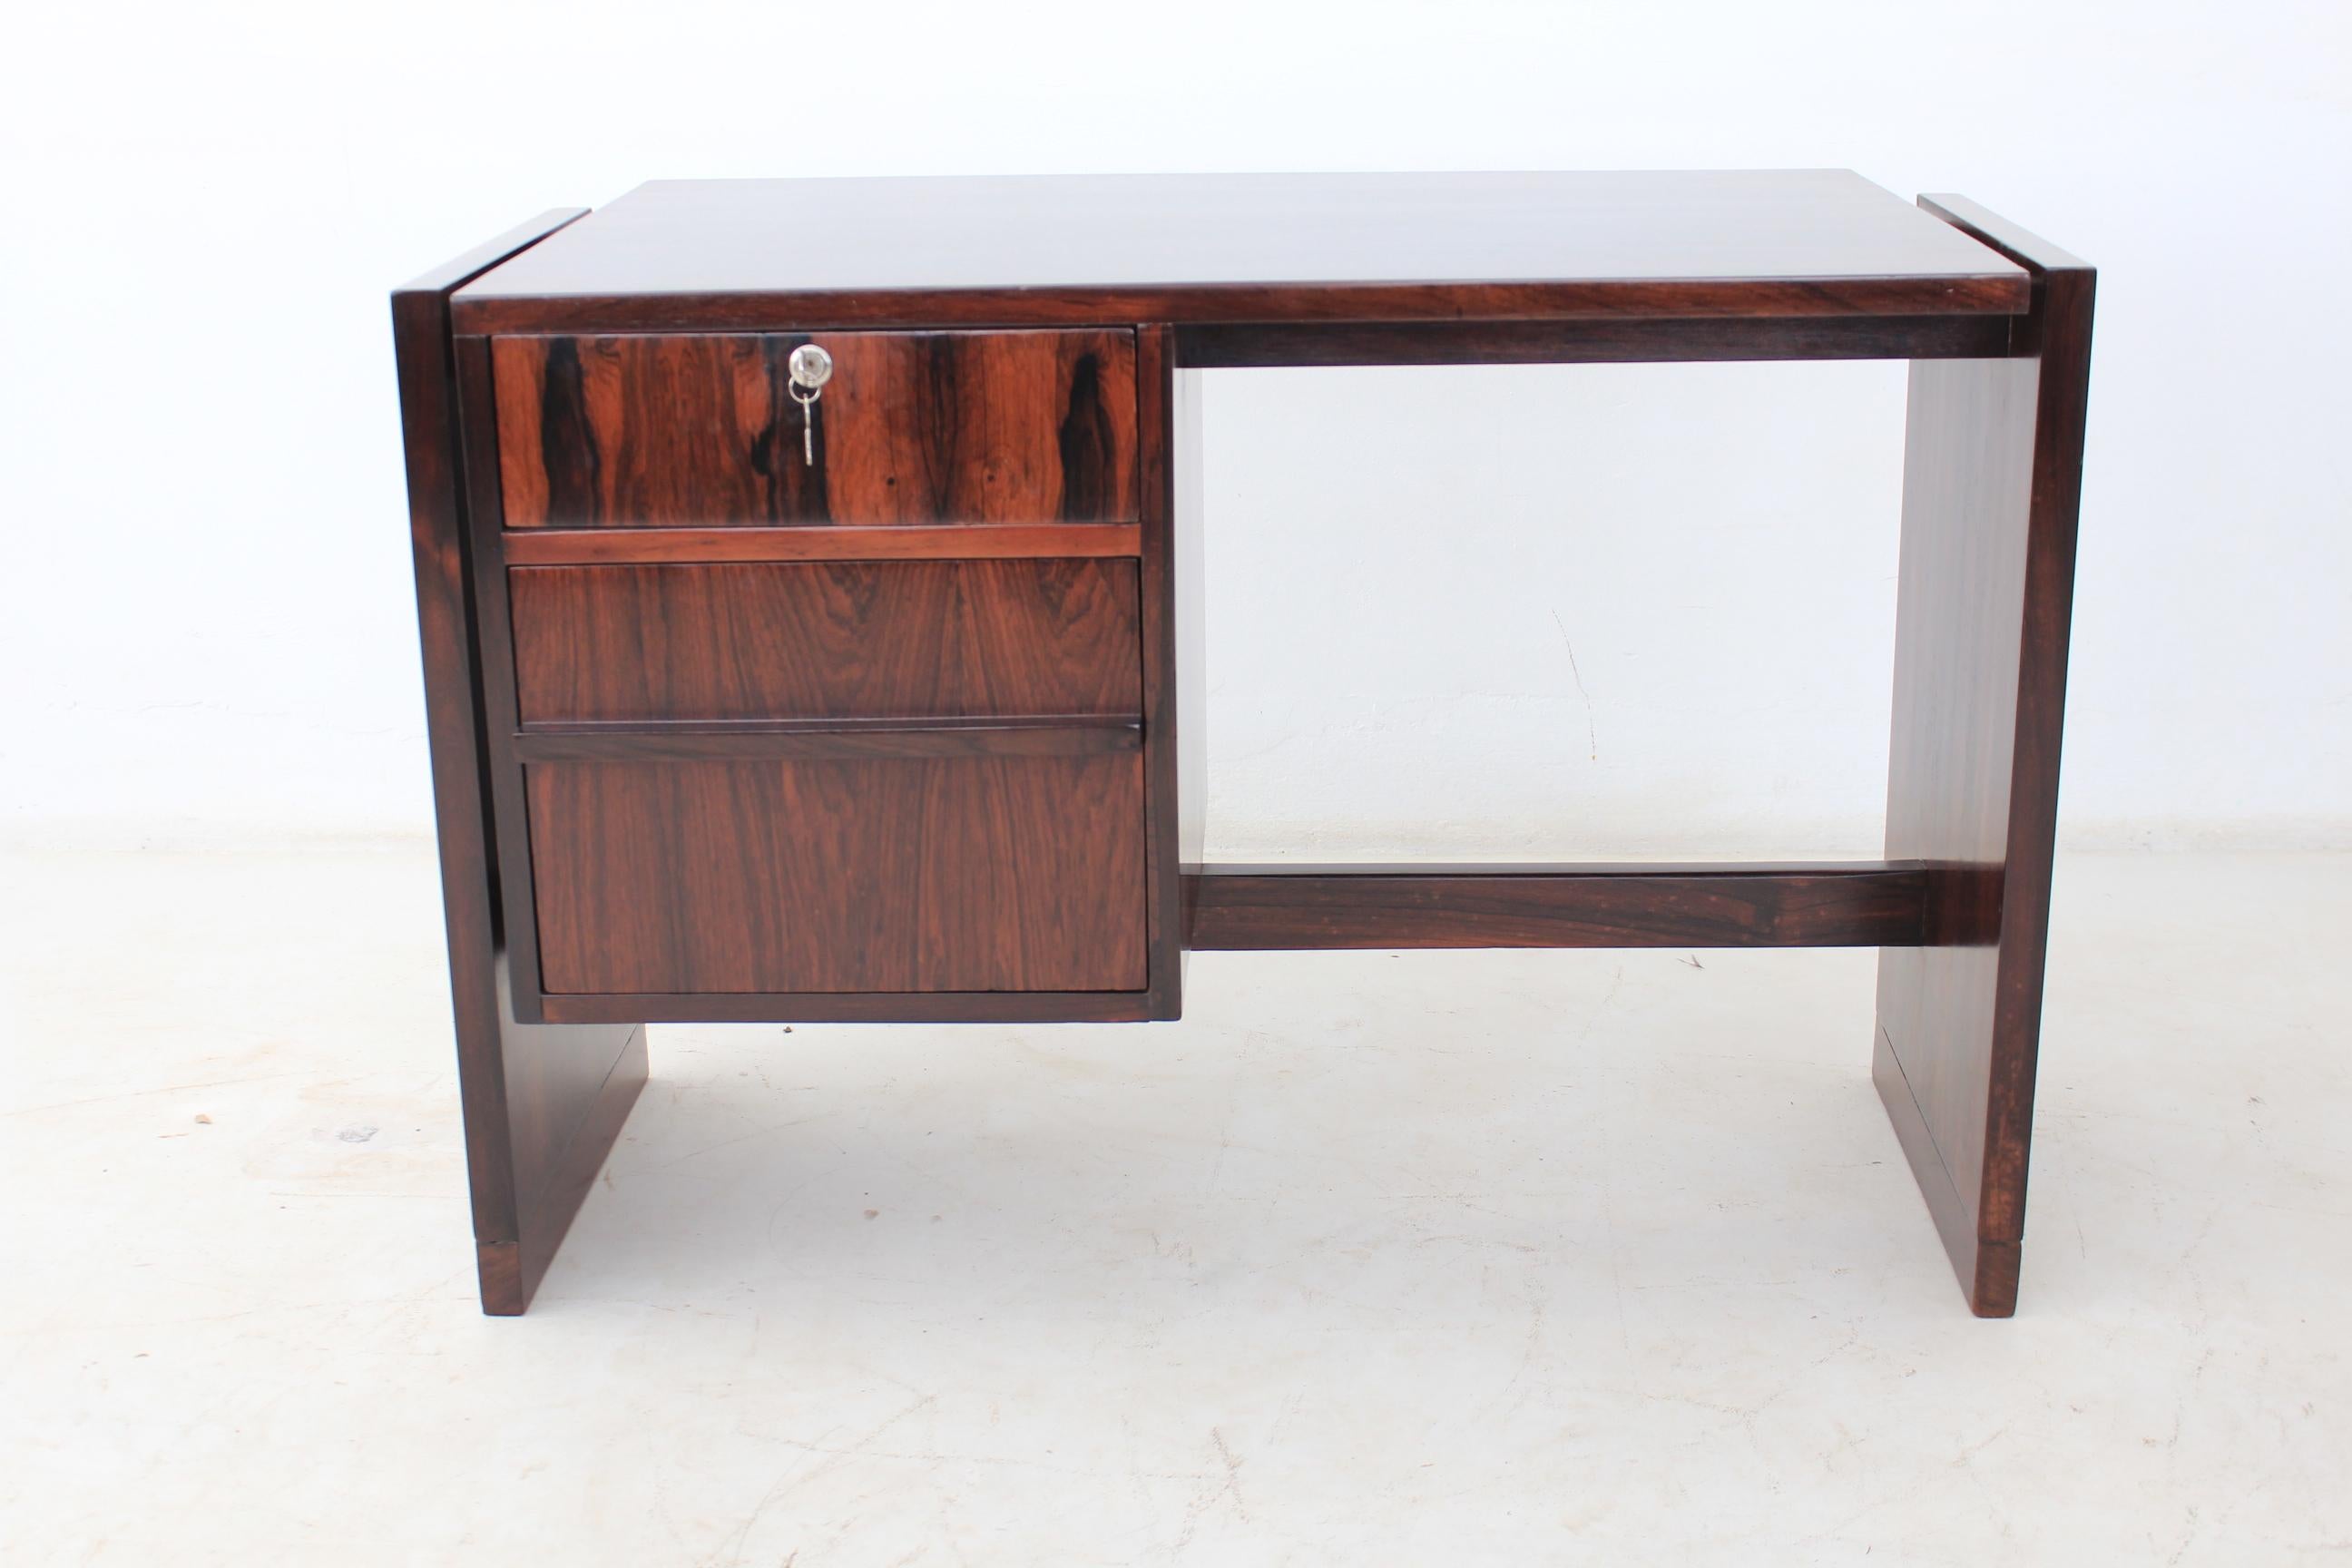 Sophisticated desk with a clean and Minimalist draw. This table belonged to a 